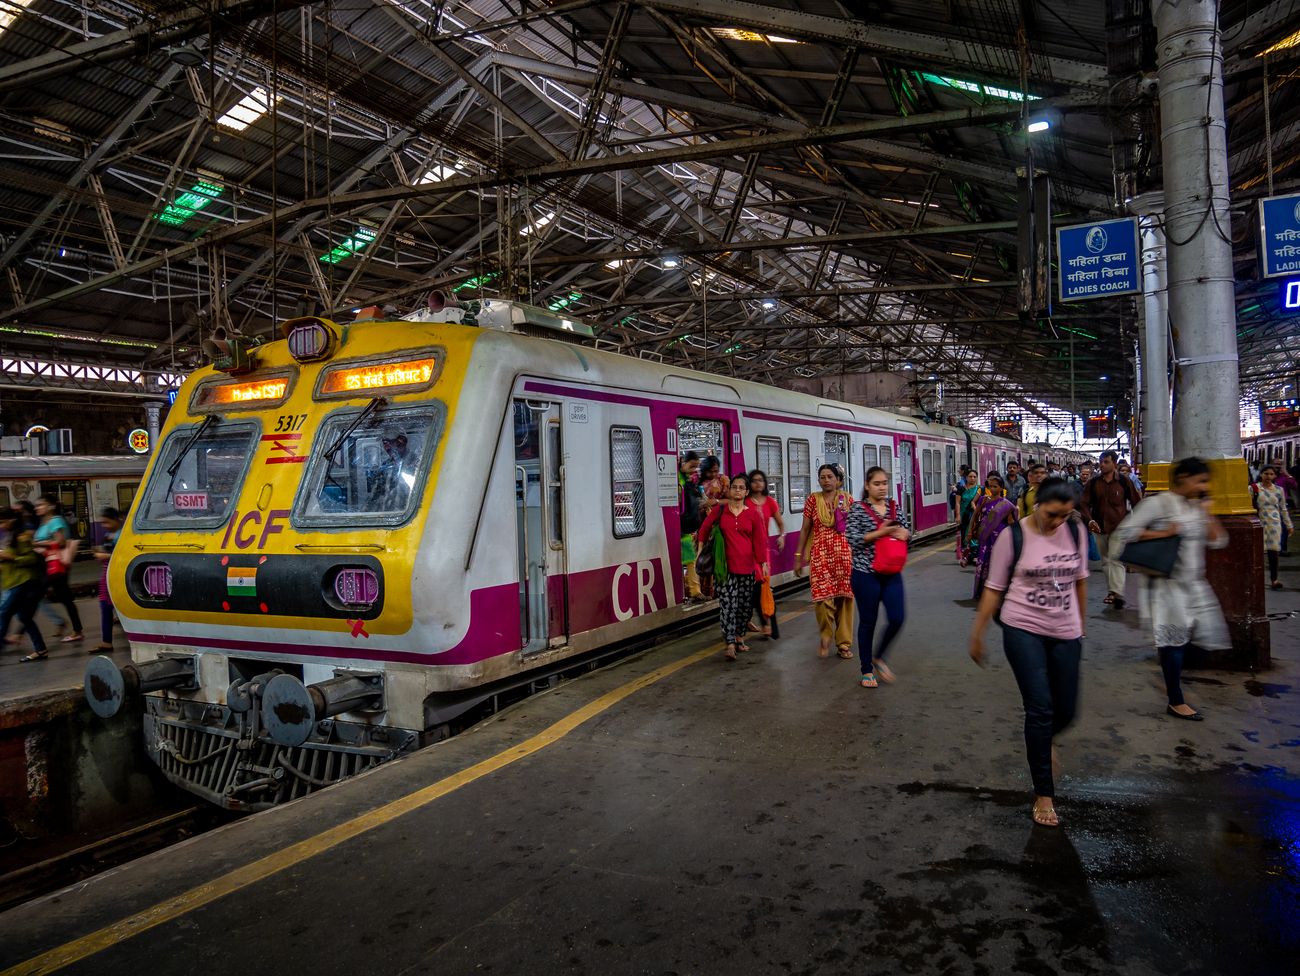 The suburban railway is deeply etched in the DNA of Mumbaikars. It's one of the busiest and most decorated commuter systems in the world